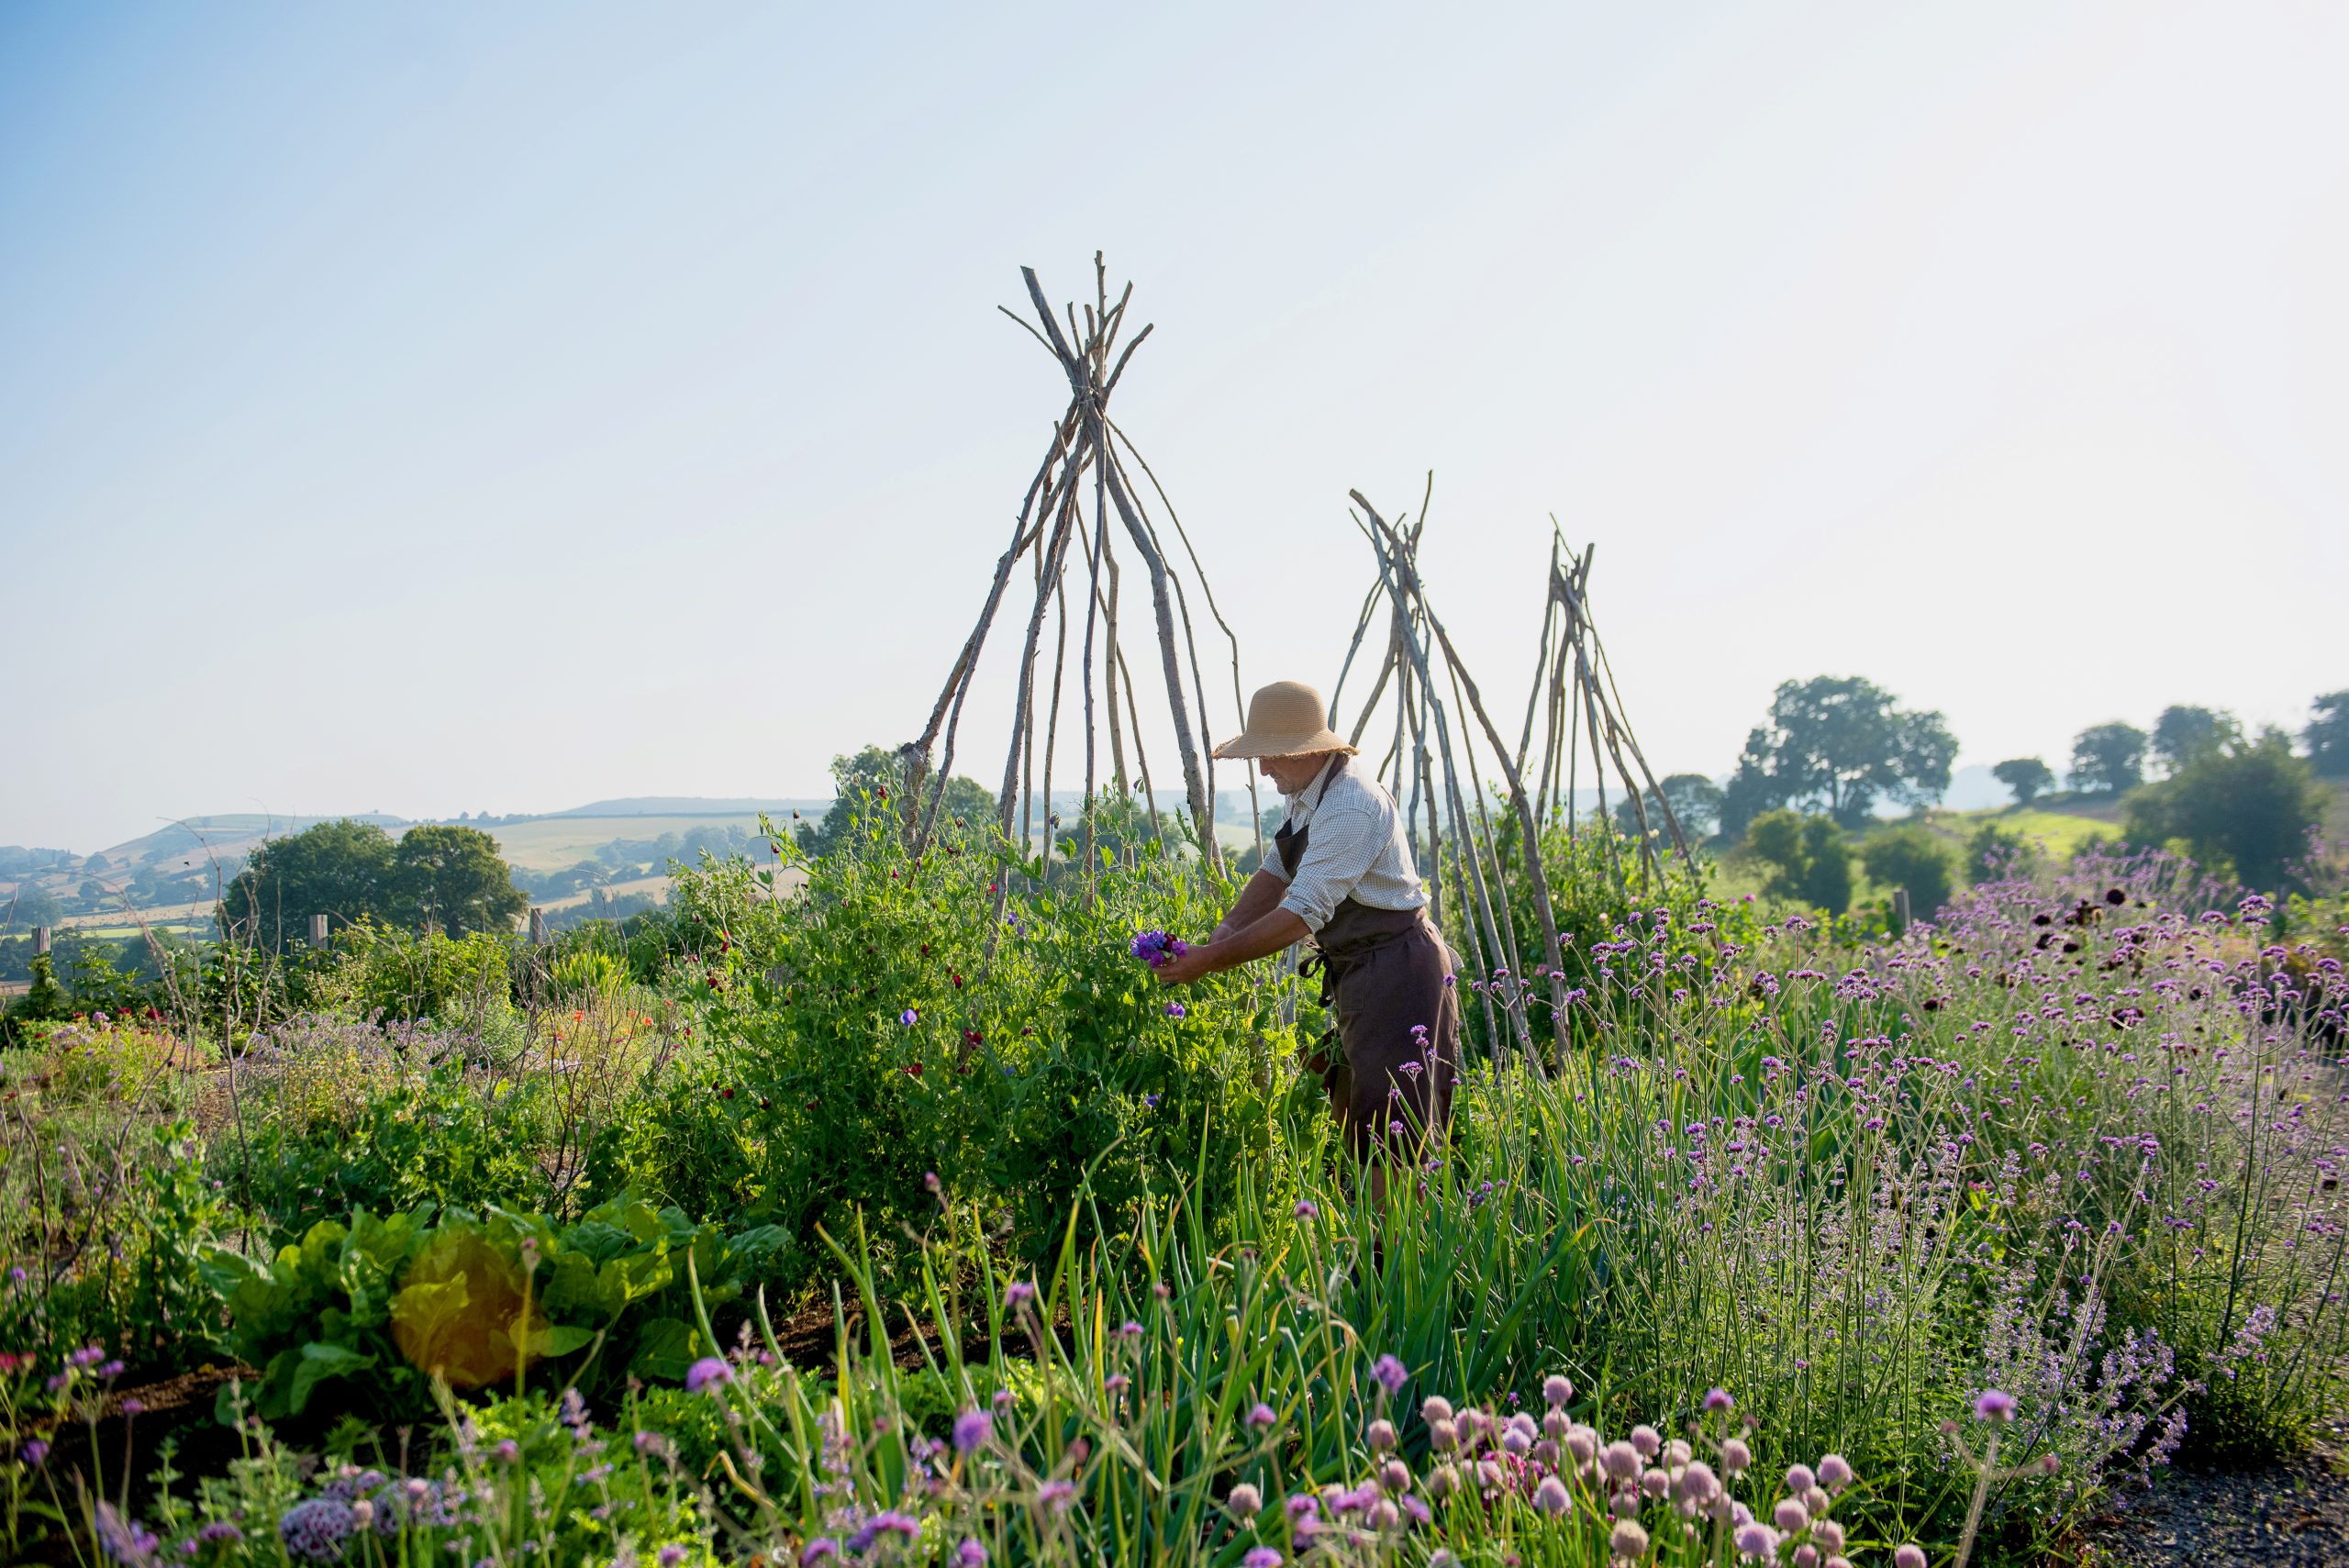 A man gardening in the countryside